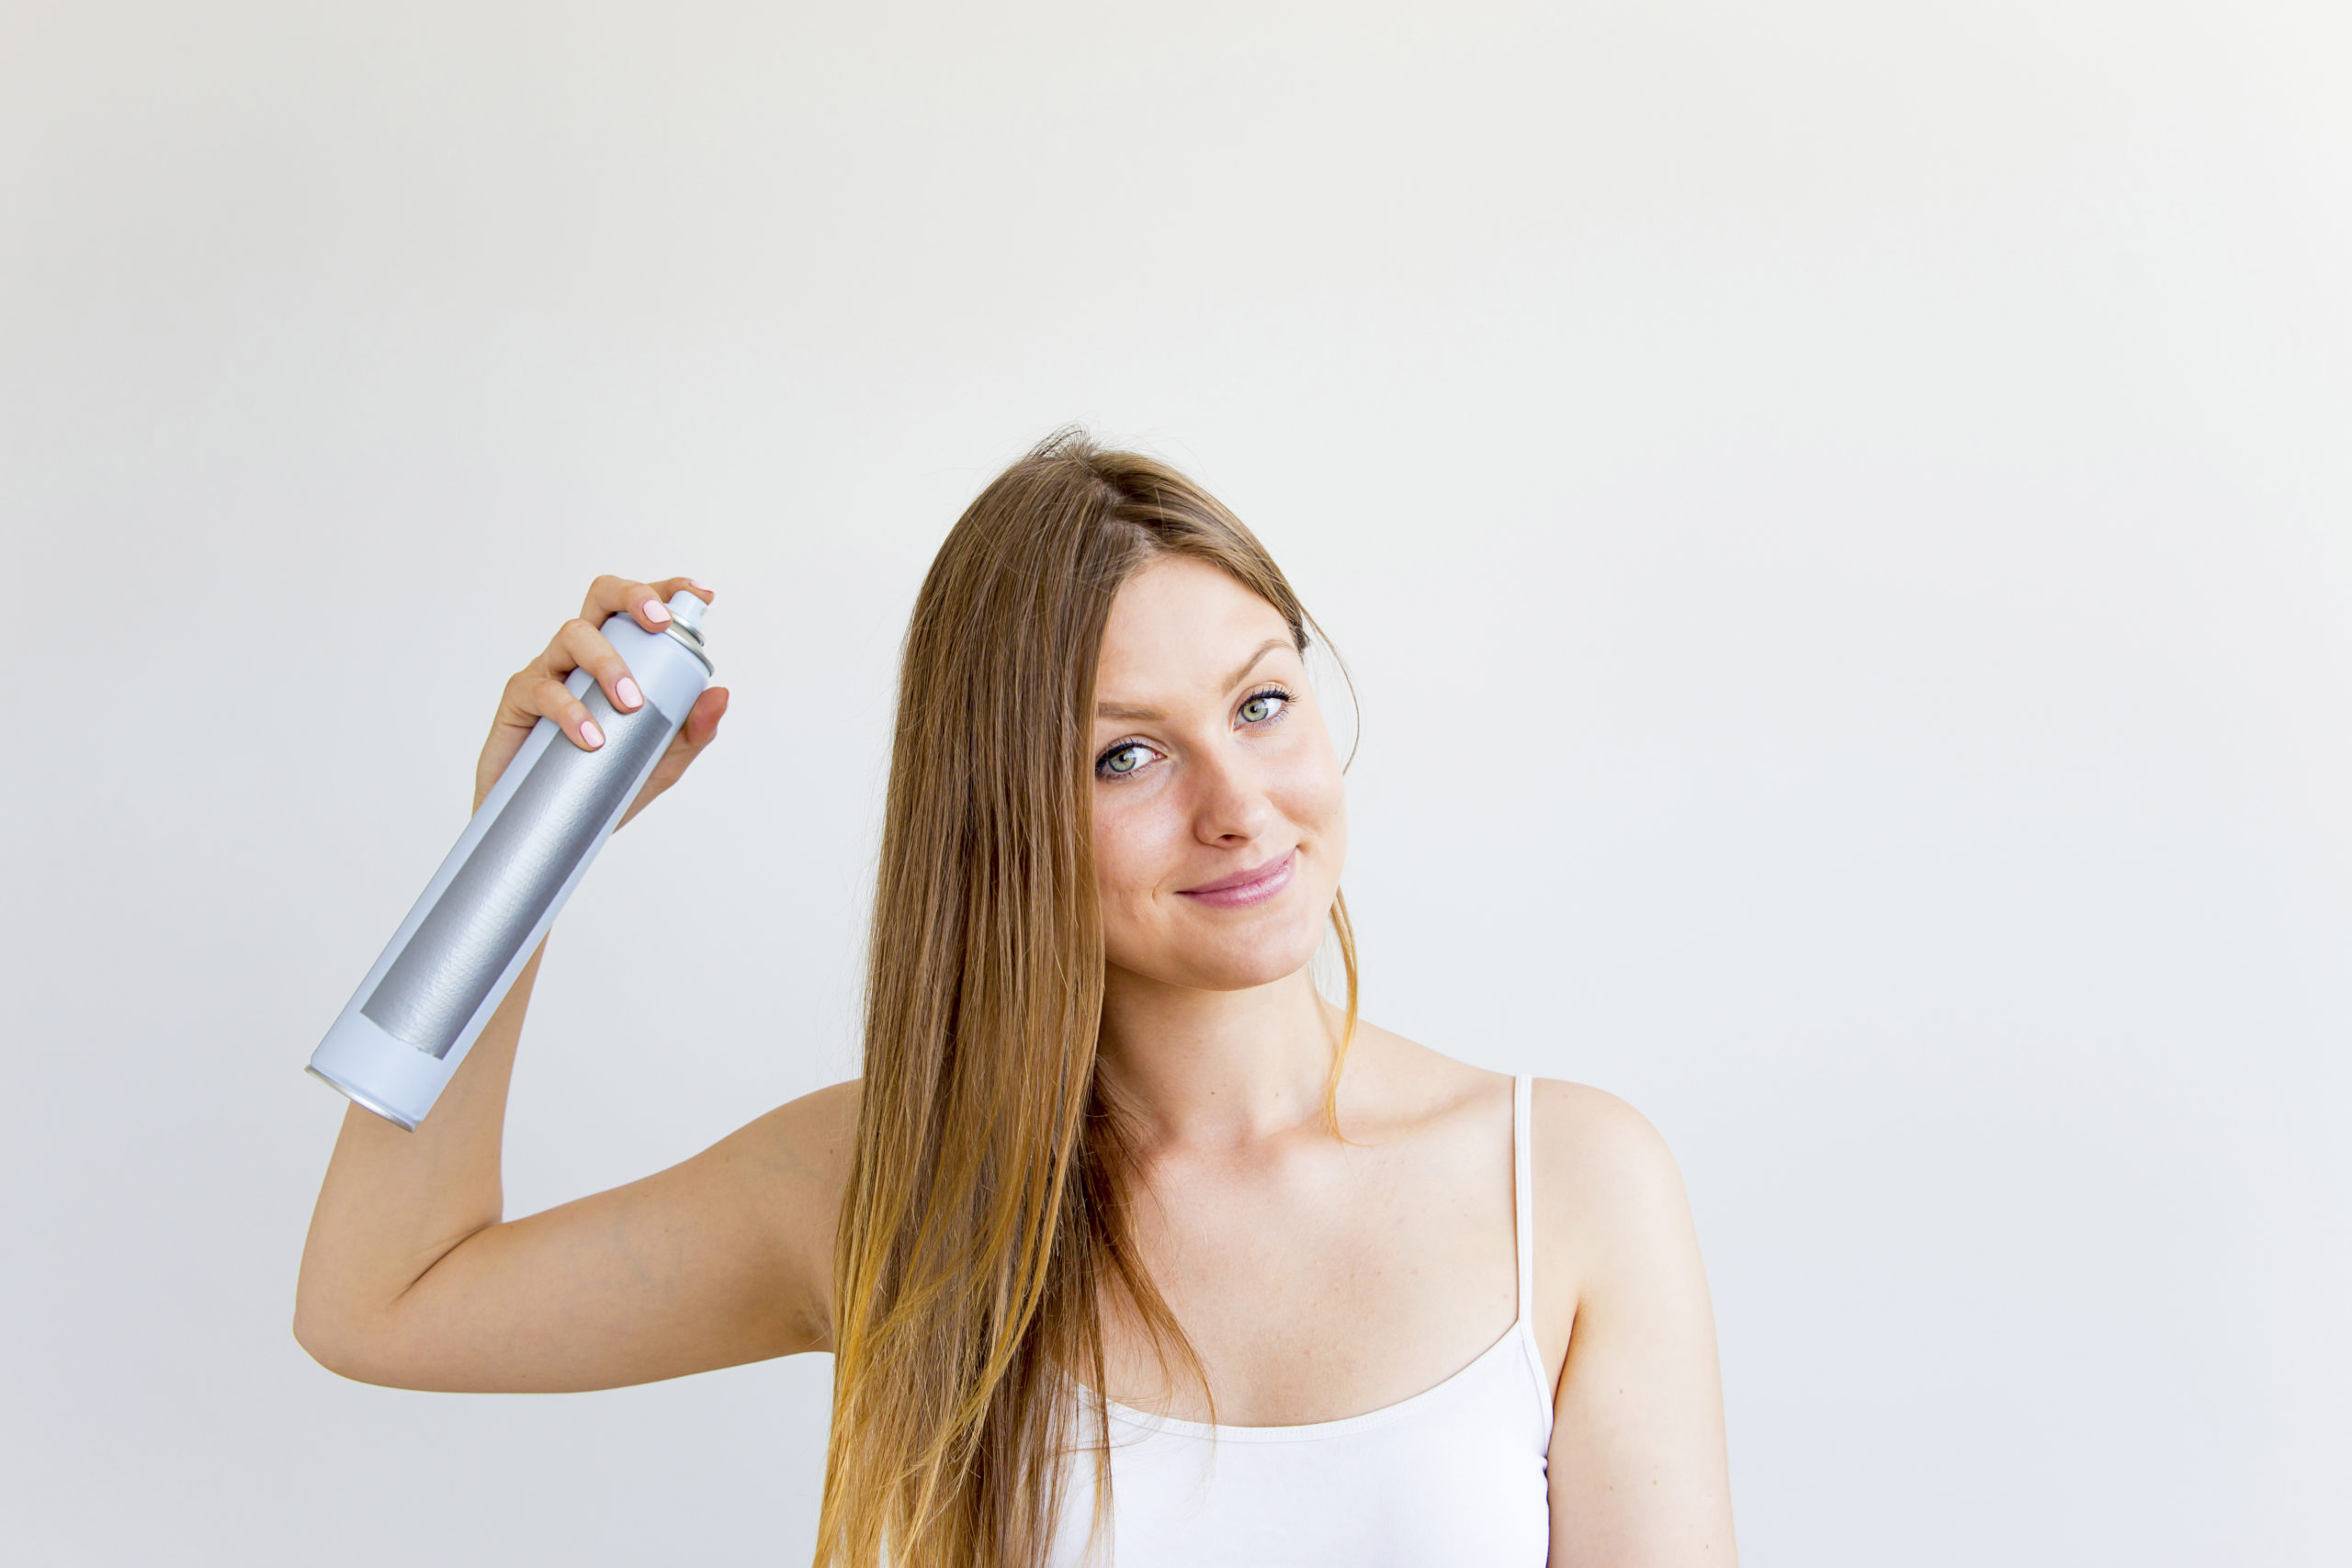 5 Tips for Using Dry Shampoo